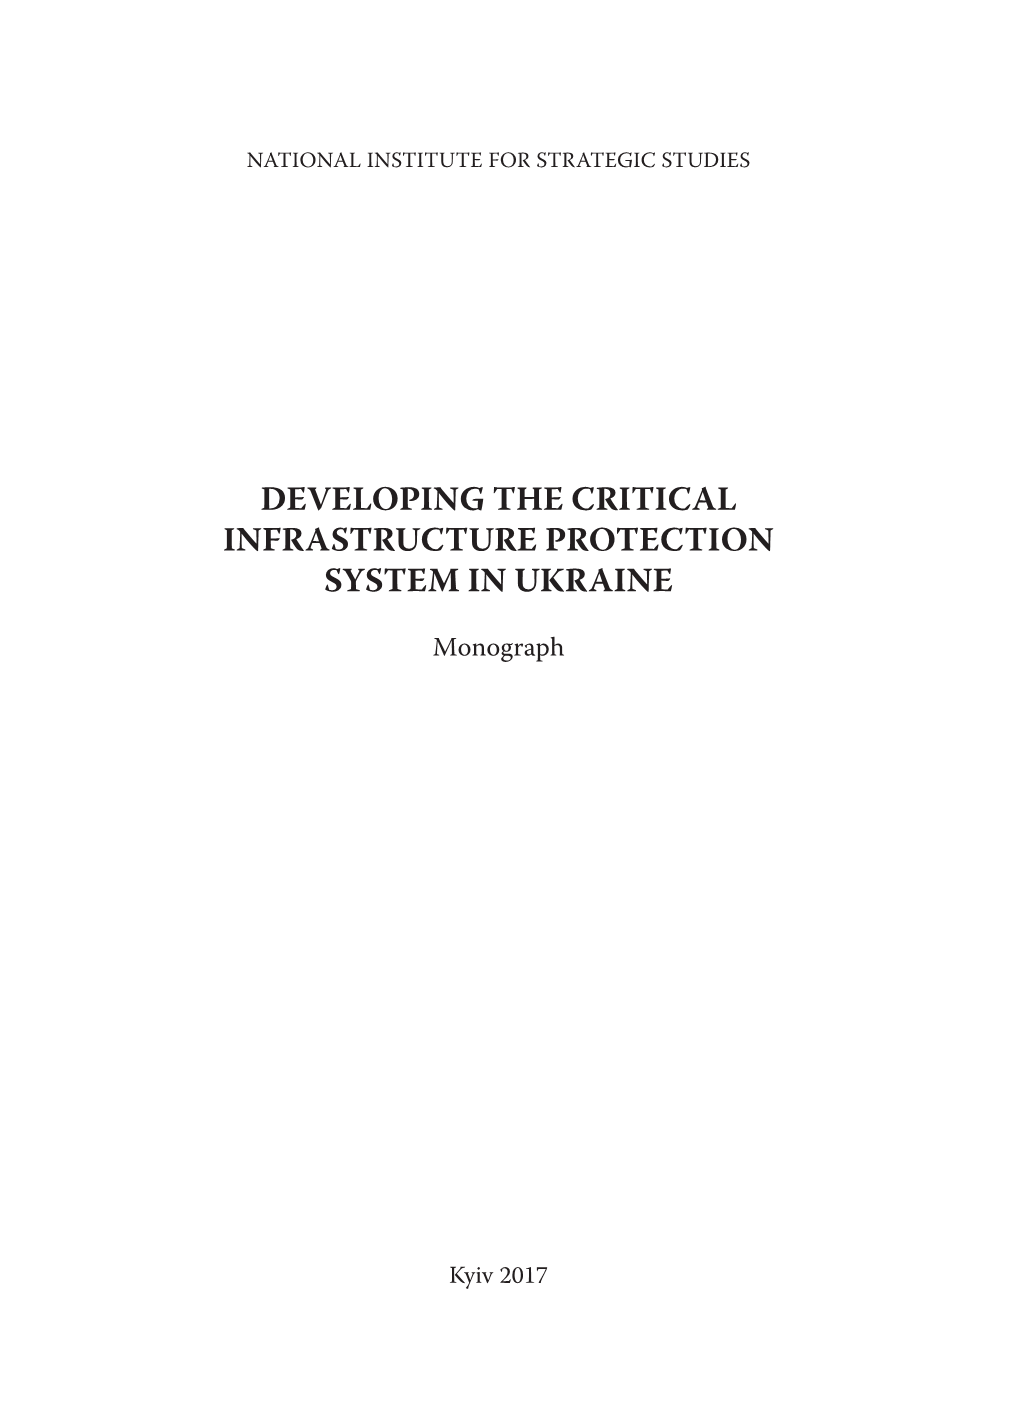 Developing the Critical Infrastructure Protection System in Ukraine